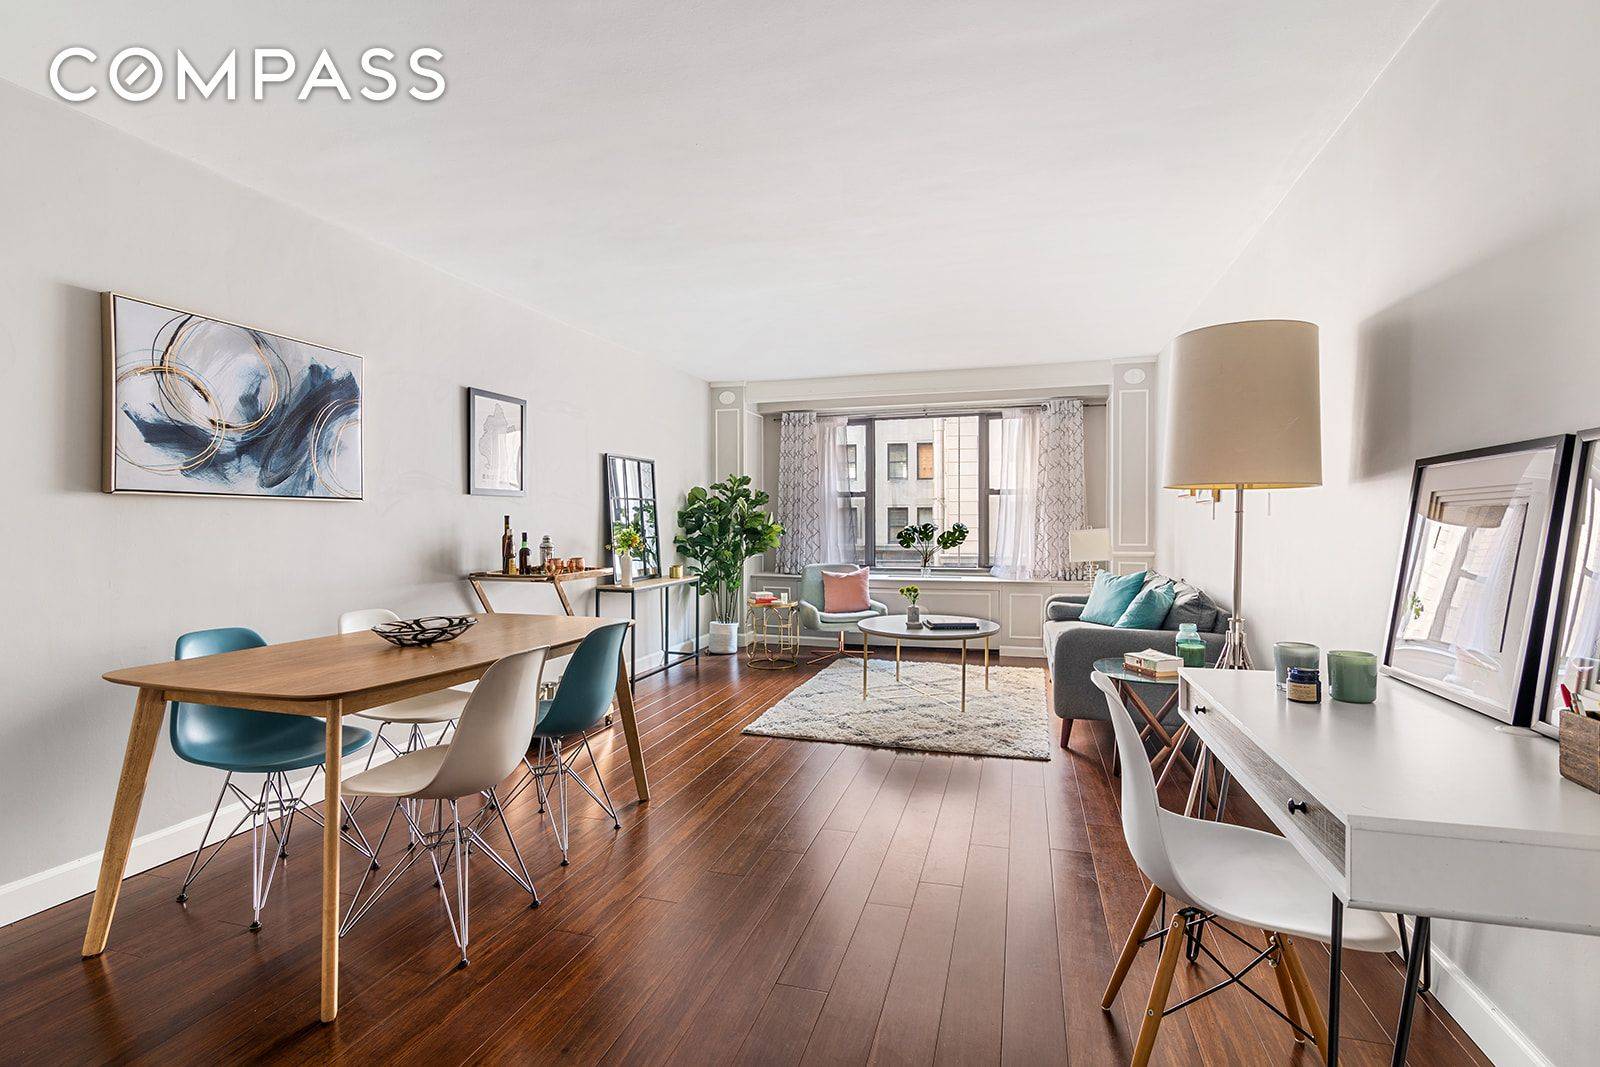 Located at the crossroads of some of Brooklyn's most vibrant neighborhoods Brooklyn Heights, Downtown Brooklyn, Boerum Hill, and Cobble Hill is this fully renovated and spacious one bedroom home that ...